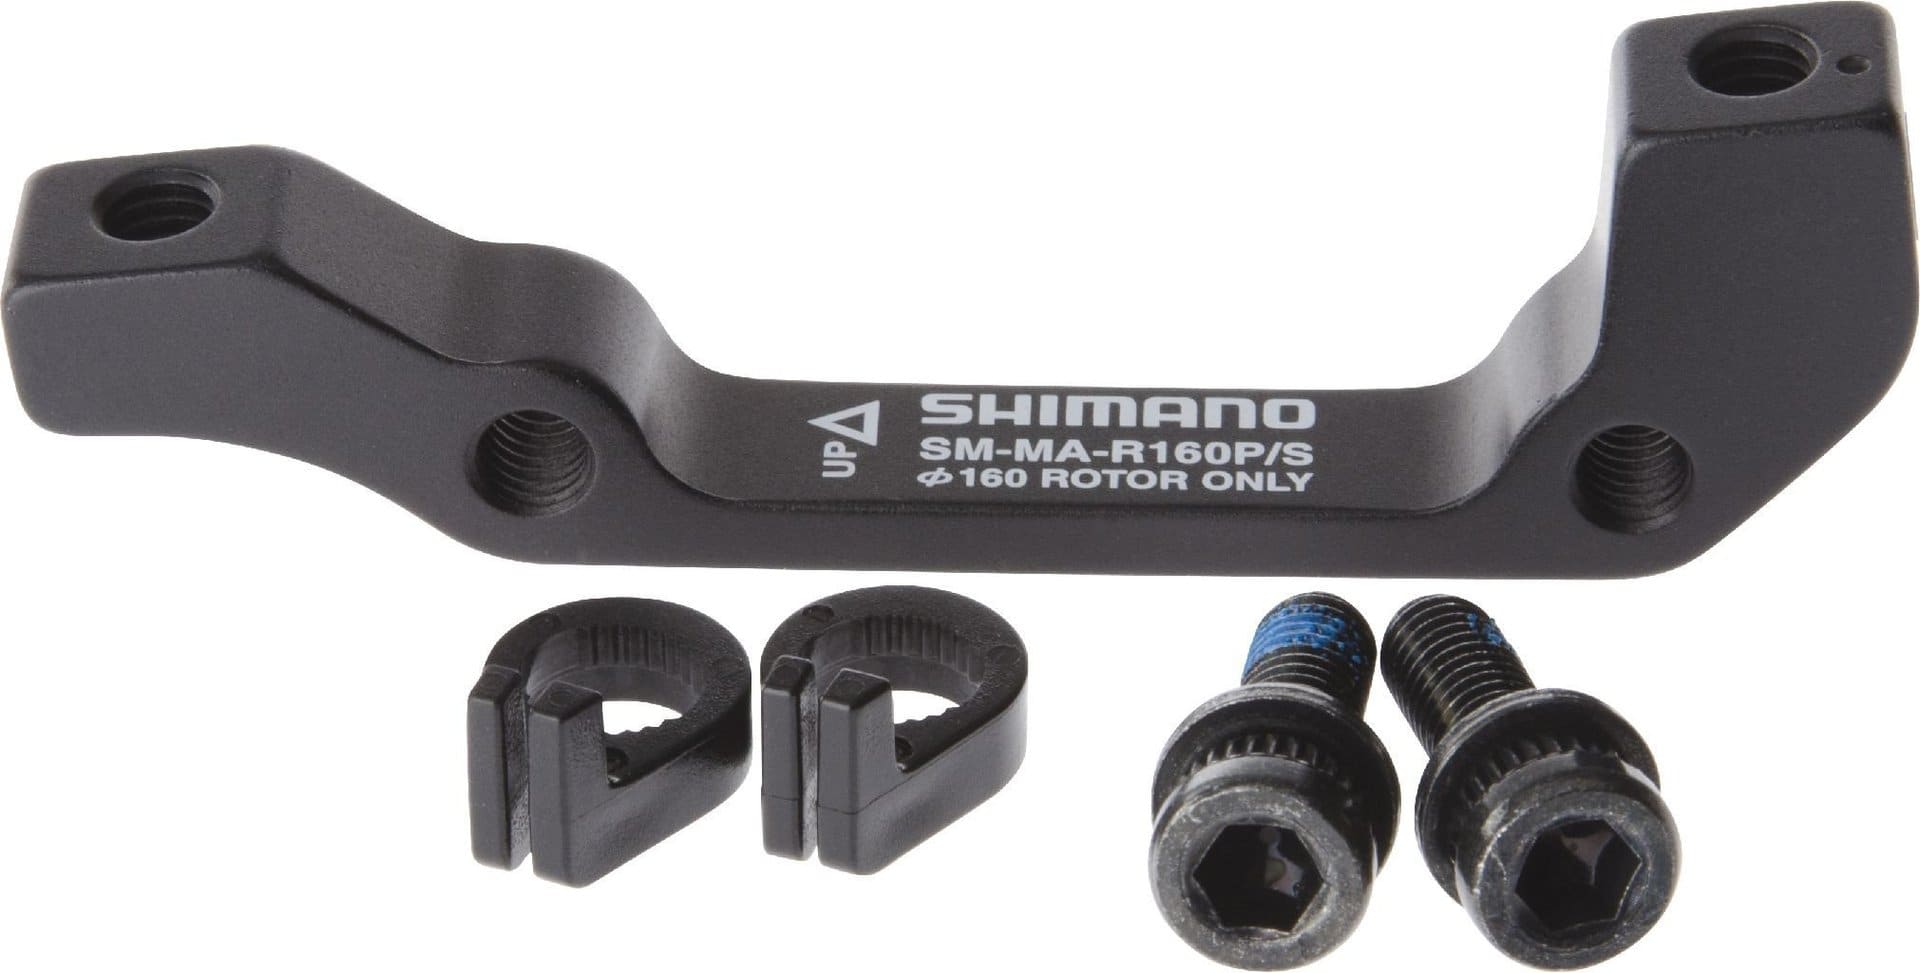 Shimano HR Adapter 160mm | SM-MA-R160P/S